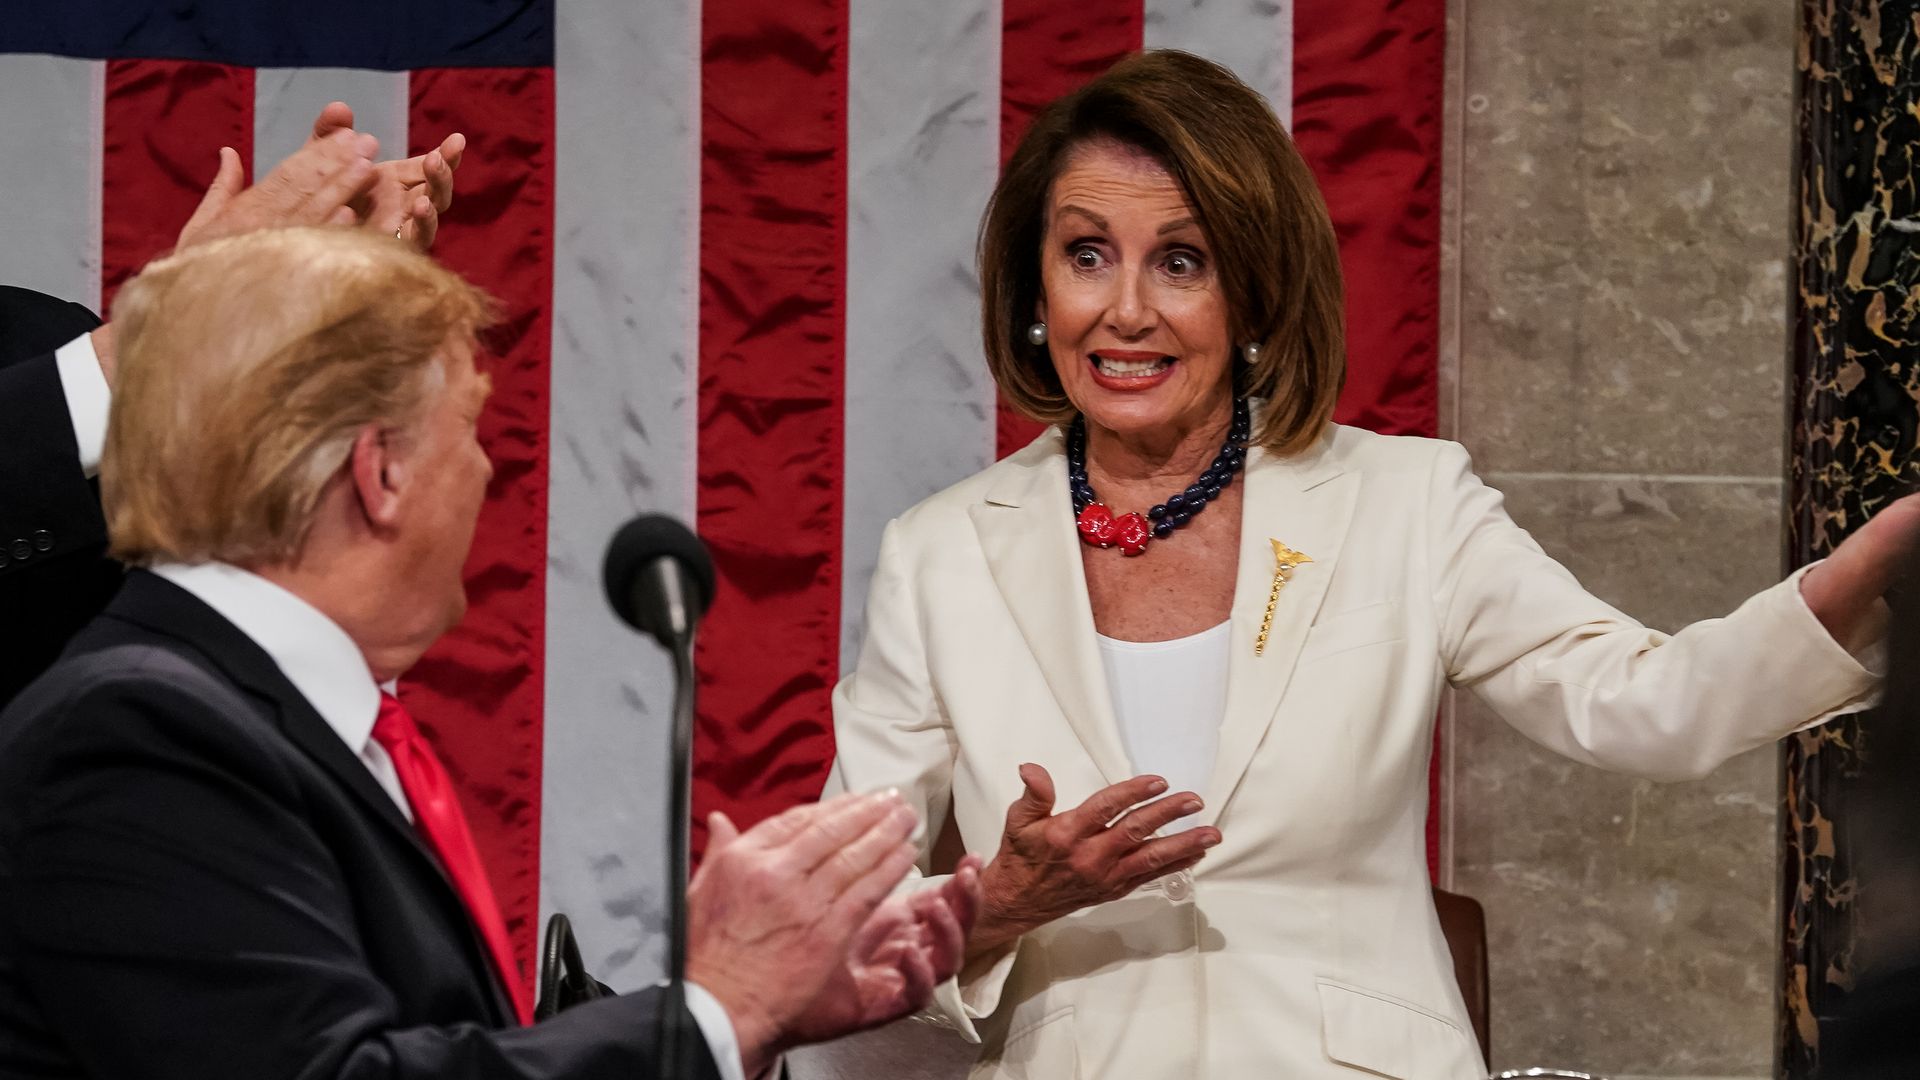  Speaker Nancy Pelosi gestures as President Donald Trump and Vice President Mike Pence applaud during the State of the Union address.